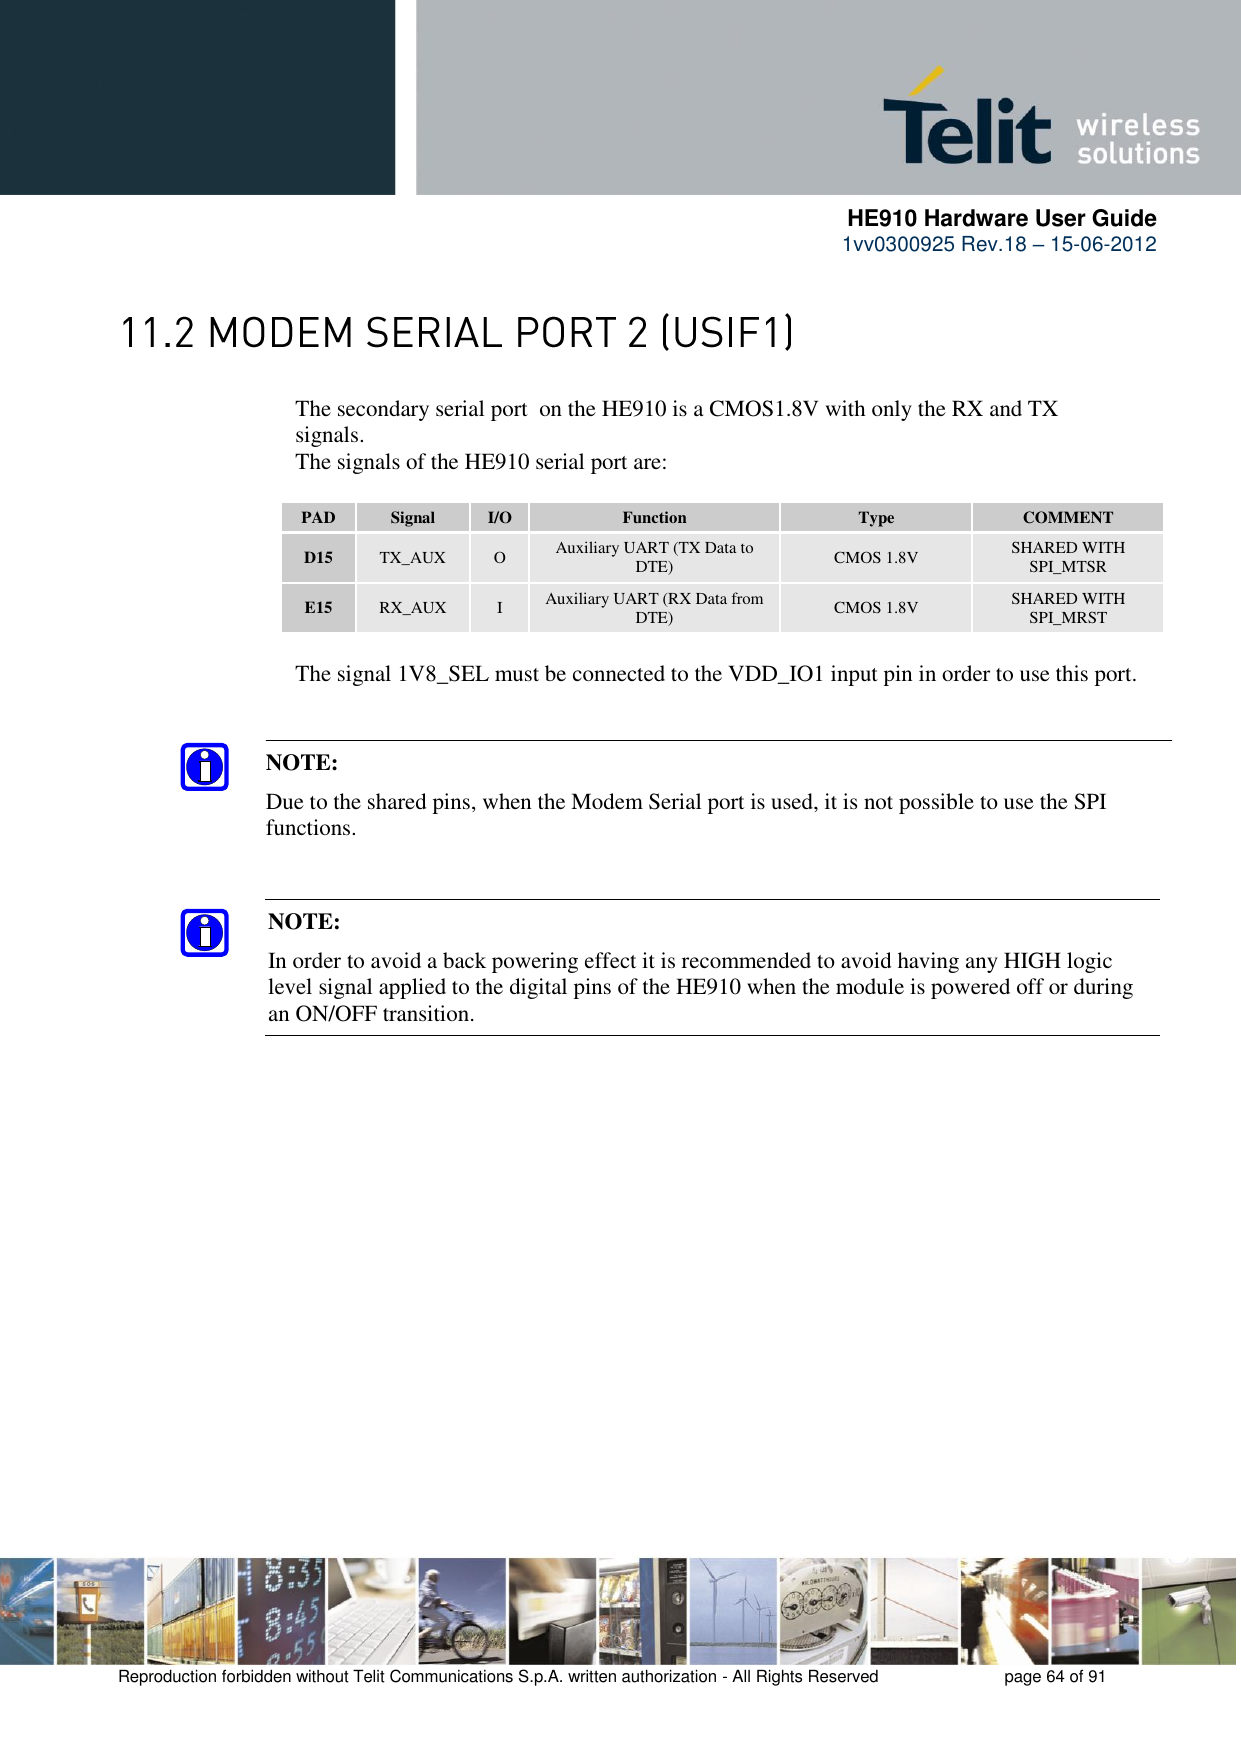      HE910 Hardware User Guide 1vv0300925 Rev.18 – 15-06-2012    Reproduction forbidden without Telit Communications S.p.A. written authorization - All Rights Reserved    page 64 of 91   The secondary serial port  on the HE910 is a CMOS1.8V with only the RX and TX      signals.      The signals of the HE910 serial port are:  PAD Signal I/O Function Type COMMENT D15 TX_AUX O Auxiliary UART (TX Data to DTE) CMOS 1.8V SHARED WITH SPI_MTSR E15 RX_AUX I Auxiliary UART (RX Data from DTE) CMOS 1.8V SHARED WITH SPI_MRST    The signal 1V8_SEL must be connected to the VDD_IO1 input pin in order to use this port.  NOTE: In order to avoid a back powering effect it is recommended to avoid having any HIGH logic level signal applied to the digital pins of the HE910 when the module is powered off or during an ON/OFF transition. NOTE:  Due to the shared pins, when the Modem Serial port is used, it is not possible to use the SPI functions. 